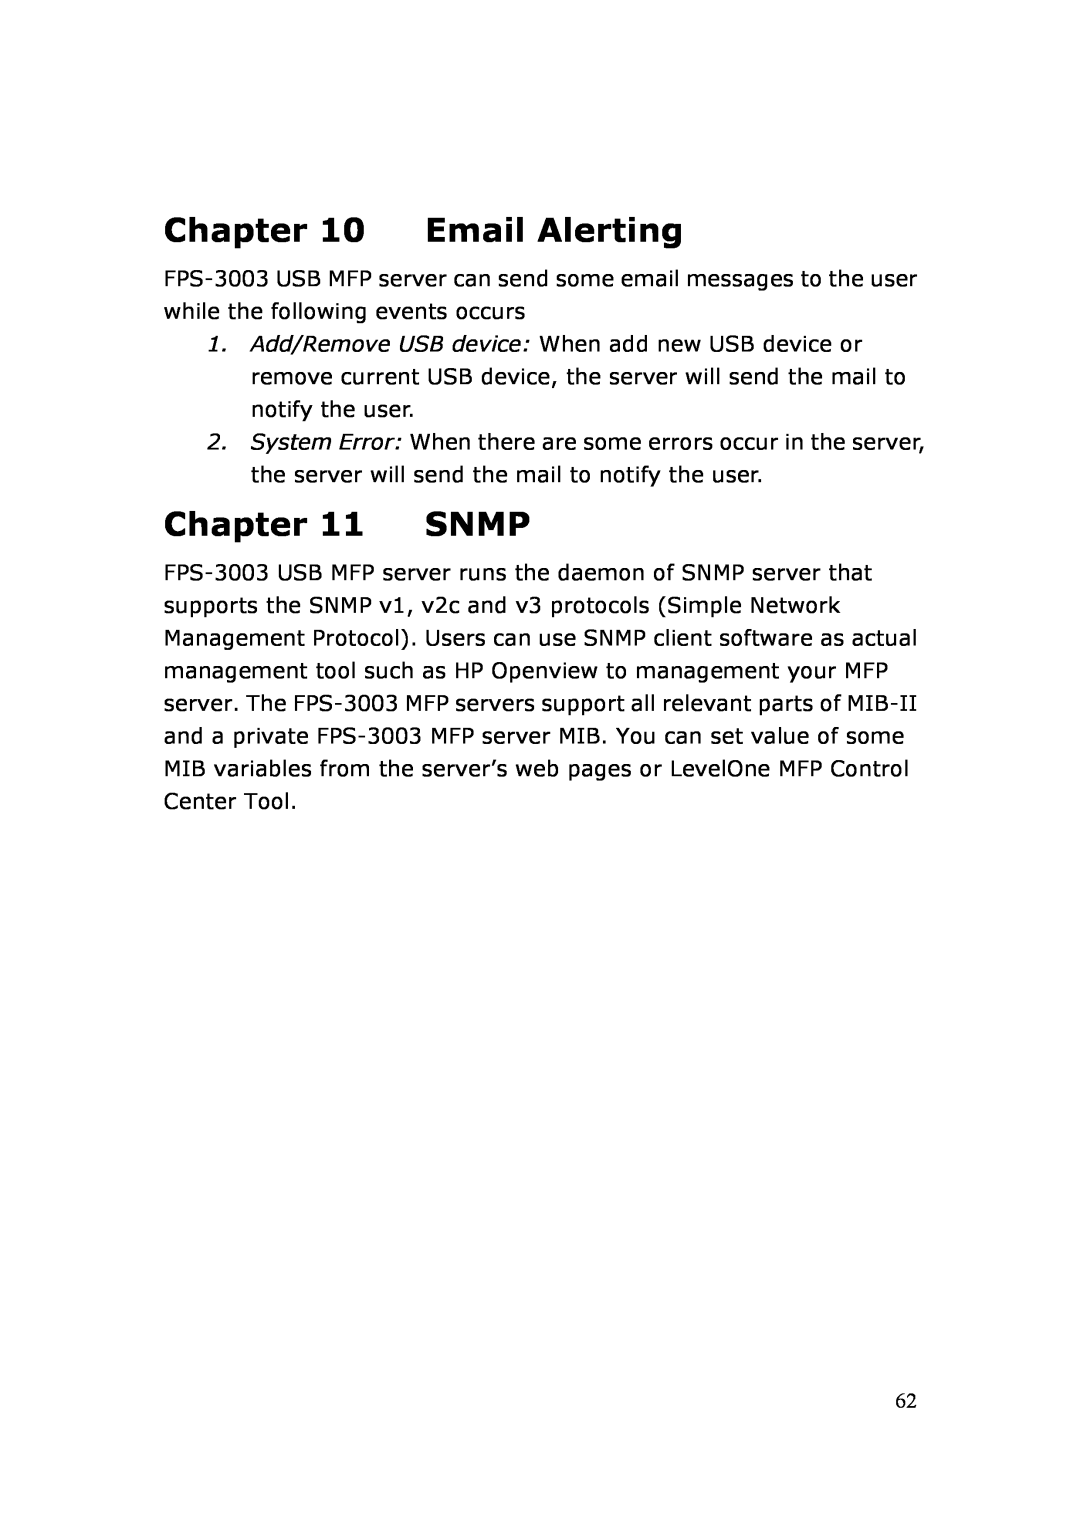 LevelOne FPS-3003 user manual Email Alerting, Snmp 